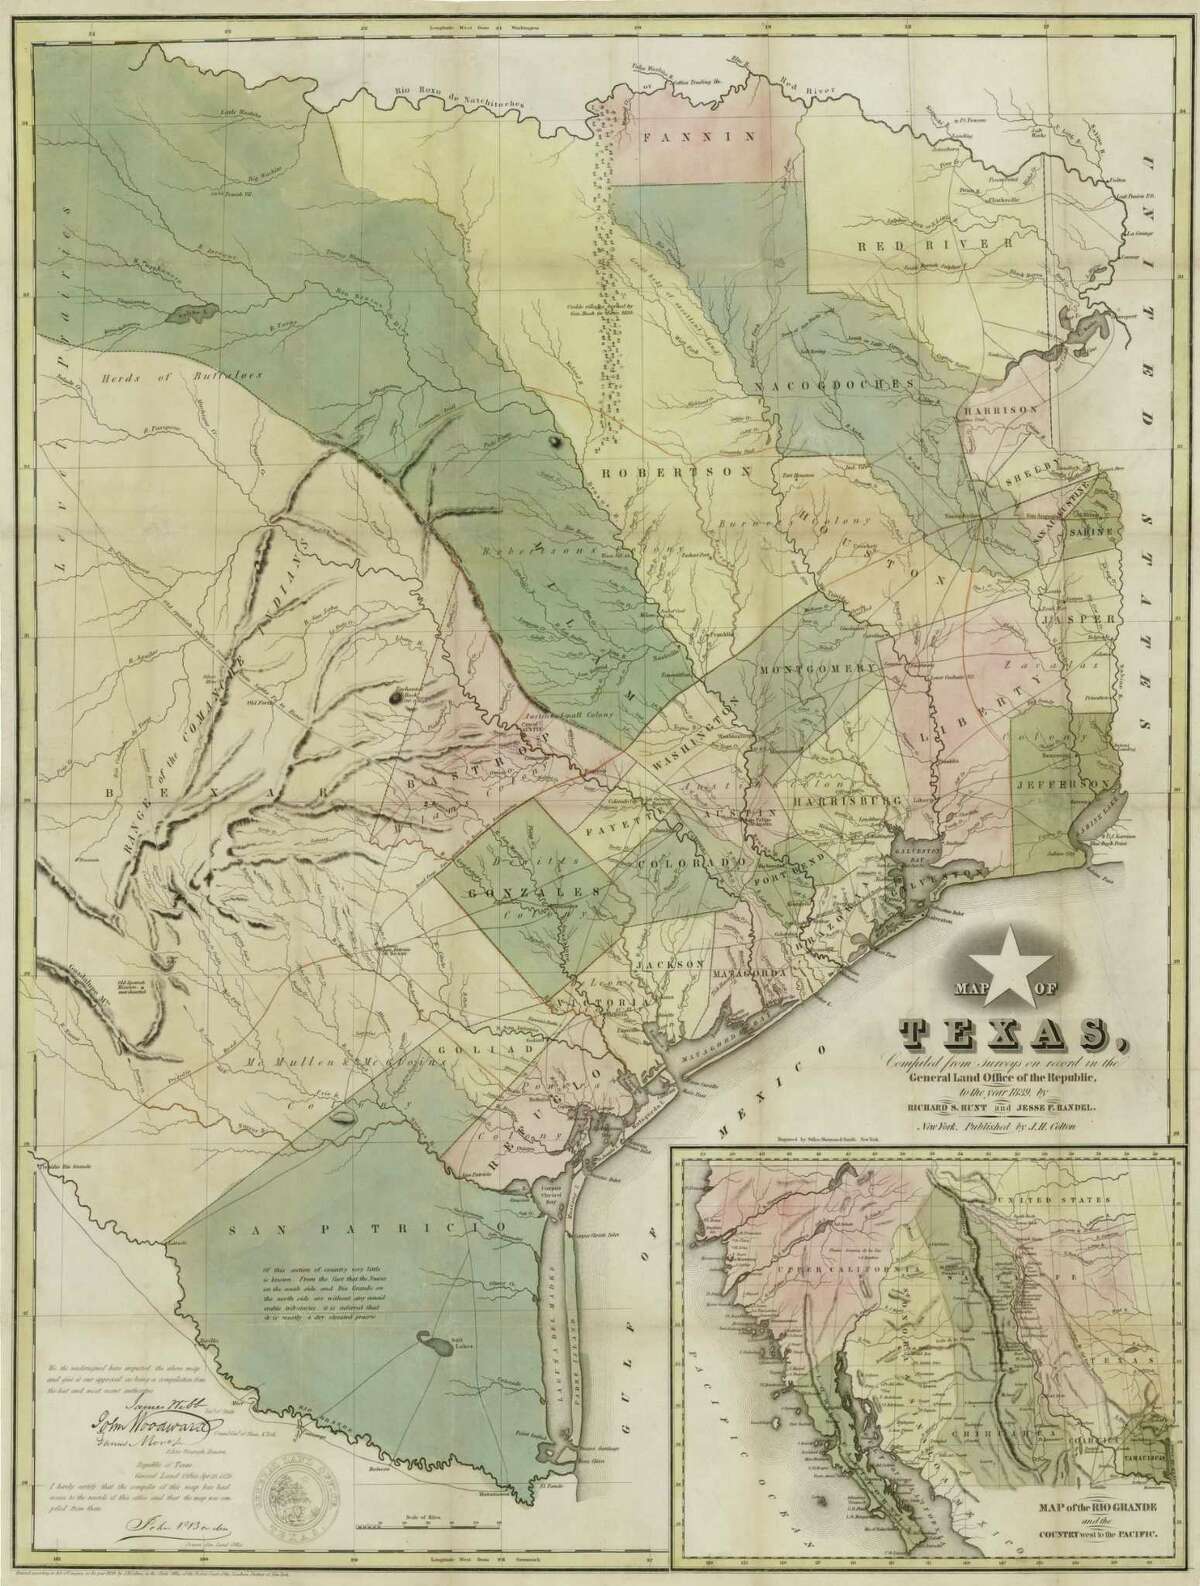 This 1839 map of Texas was made from surveys on file in the General Land Office of the Republic at the time and considered the most accurate of its kind, replacing an earlier map by Stephen F. Austin.